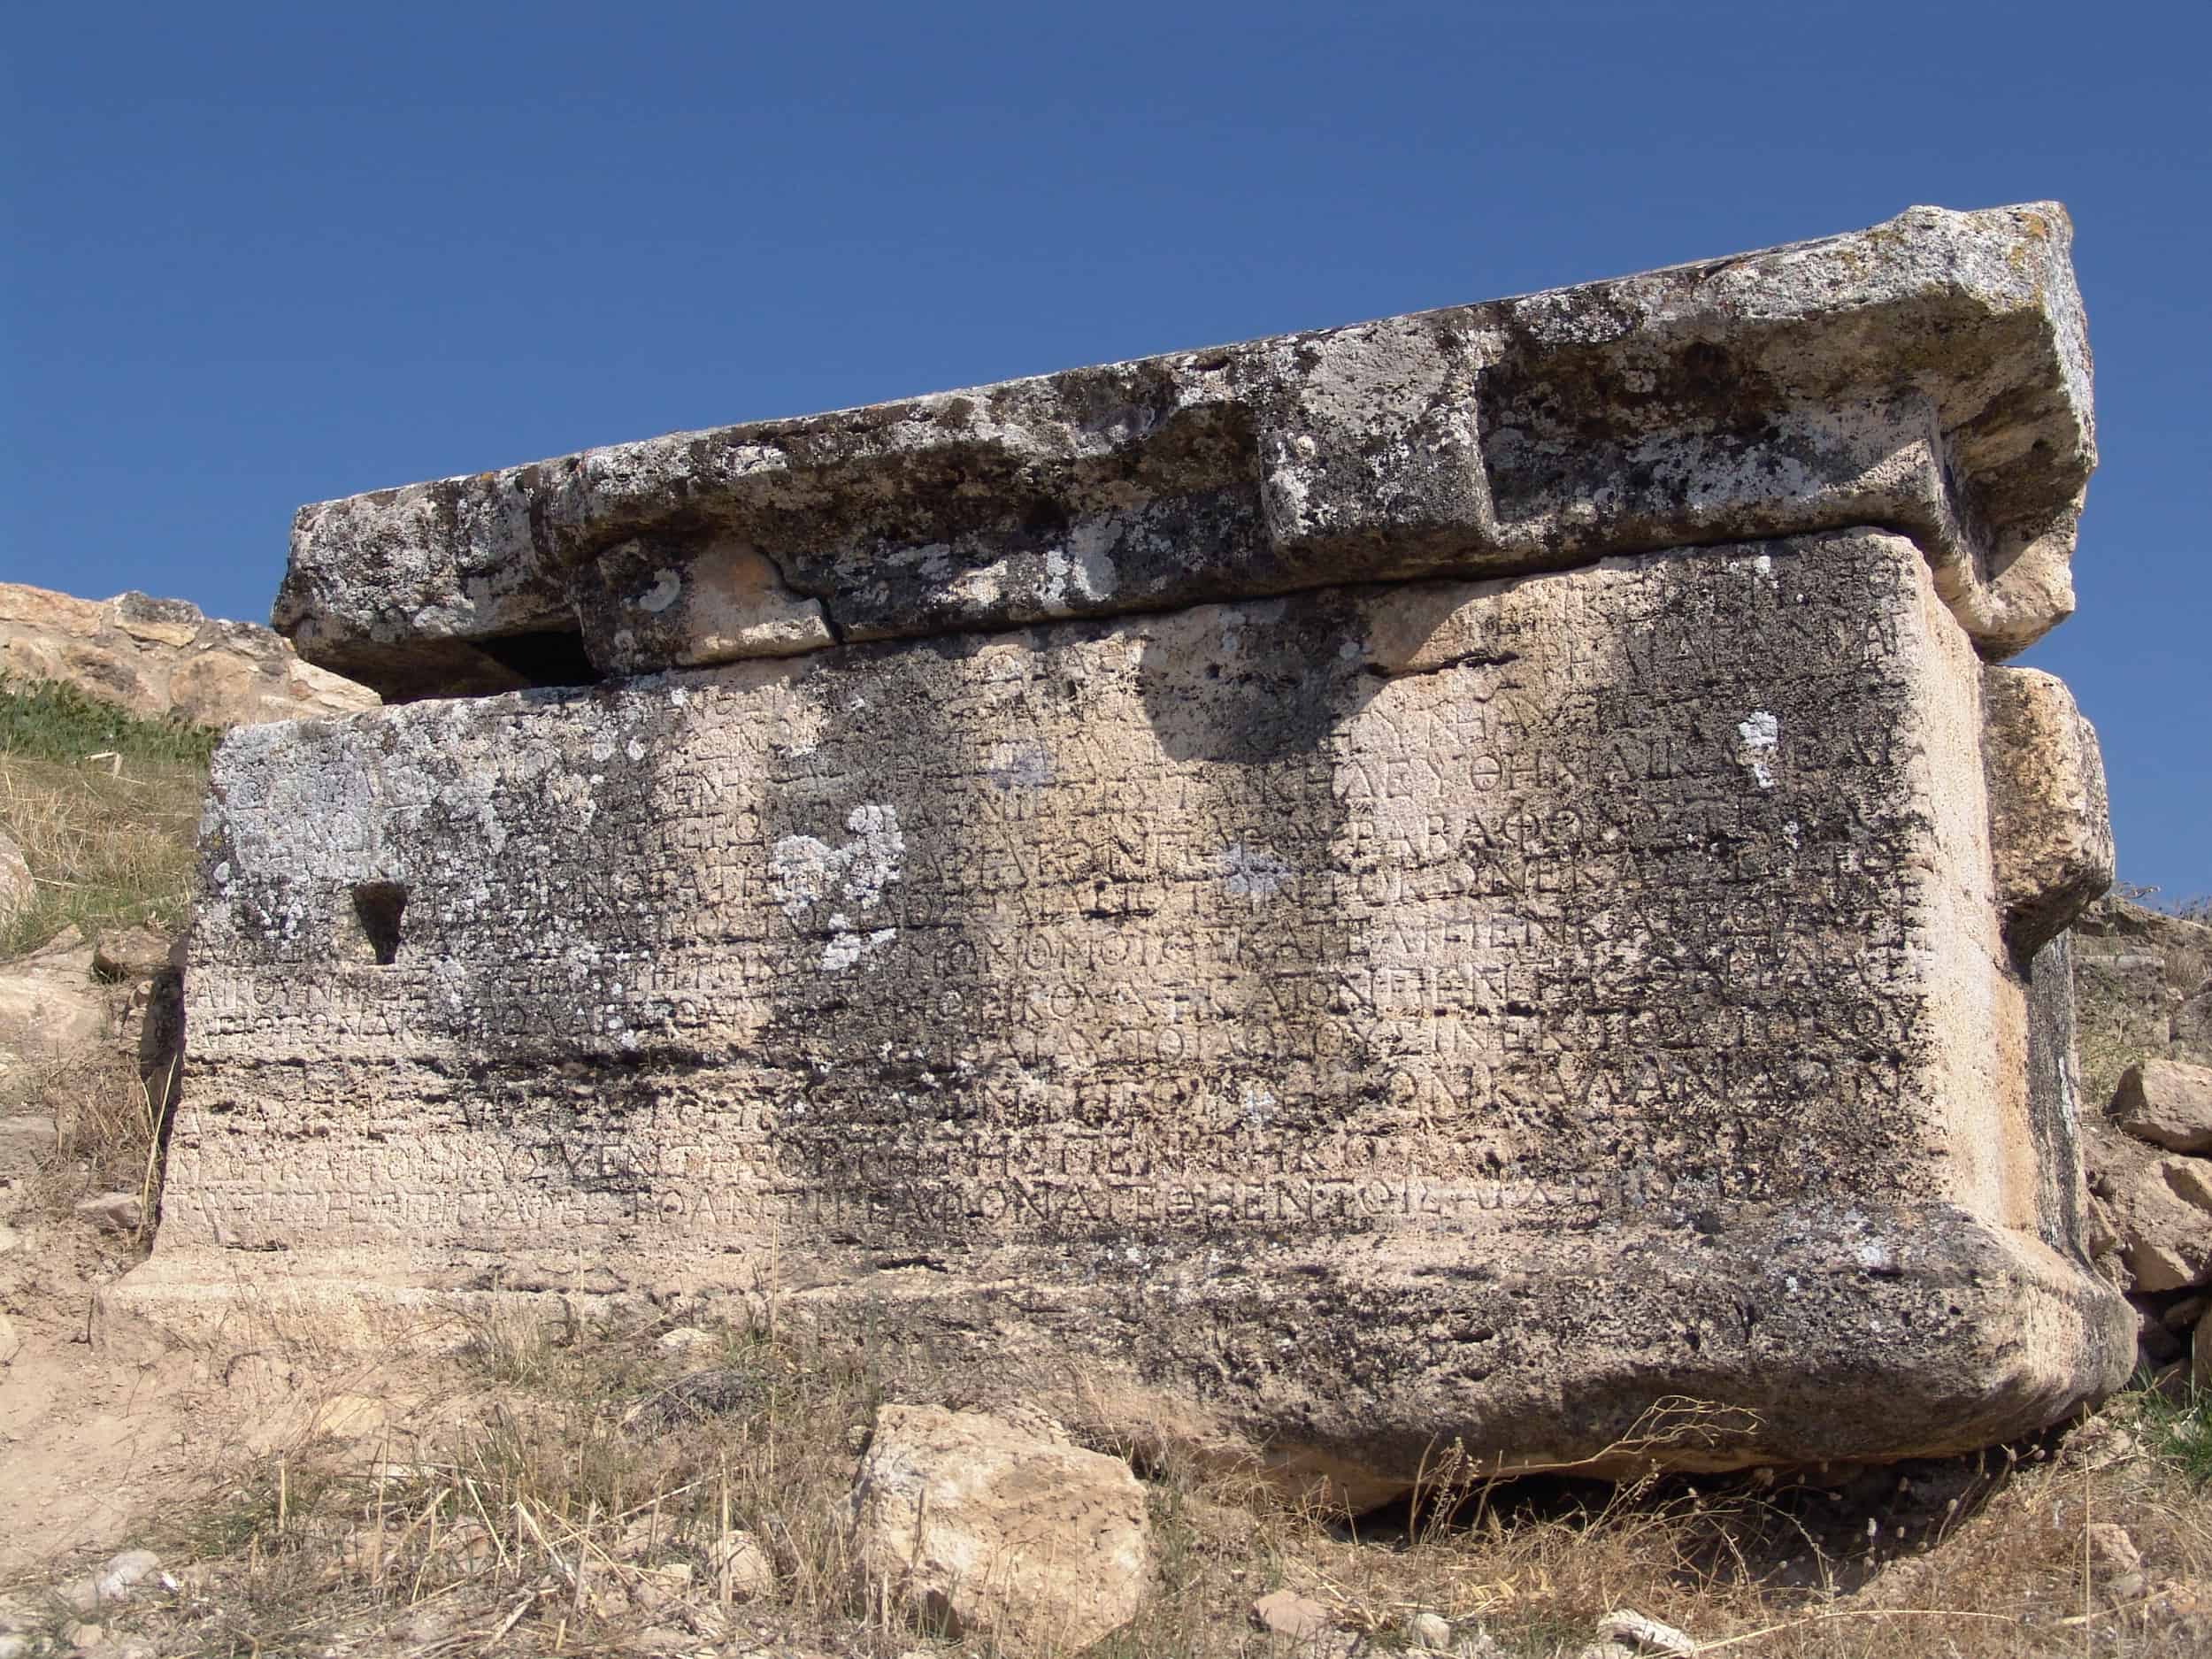 Greek inscription on the sarcophagus on the path to the Martyrium of Saint Philip